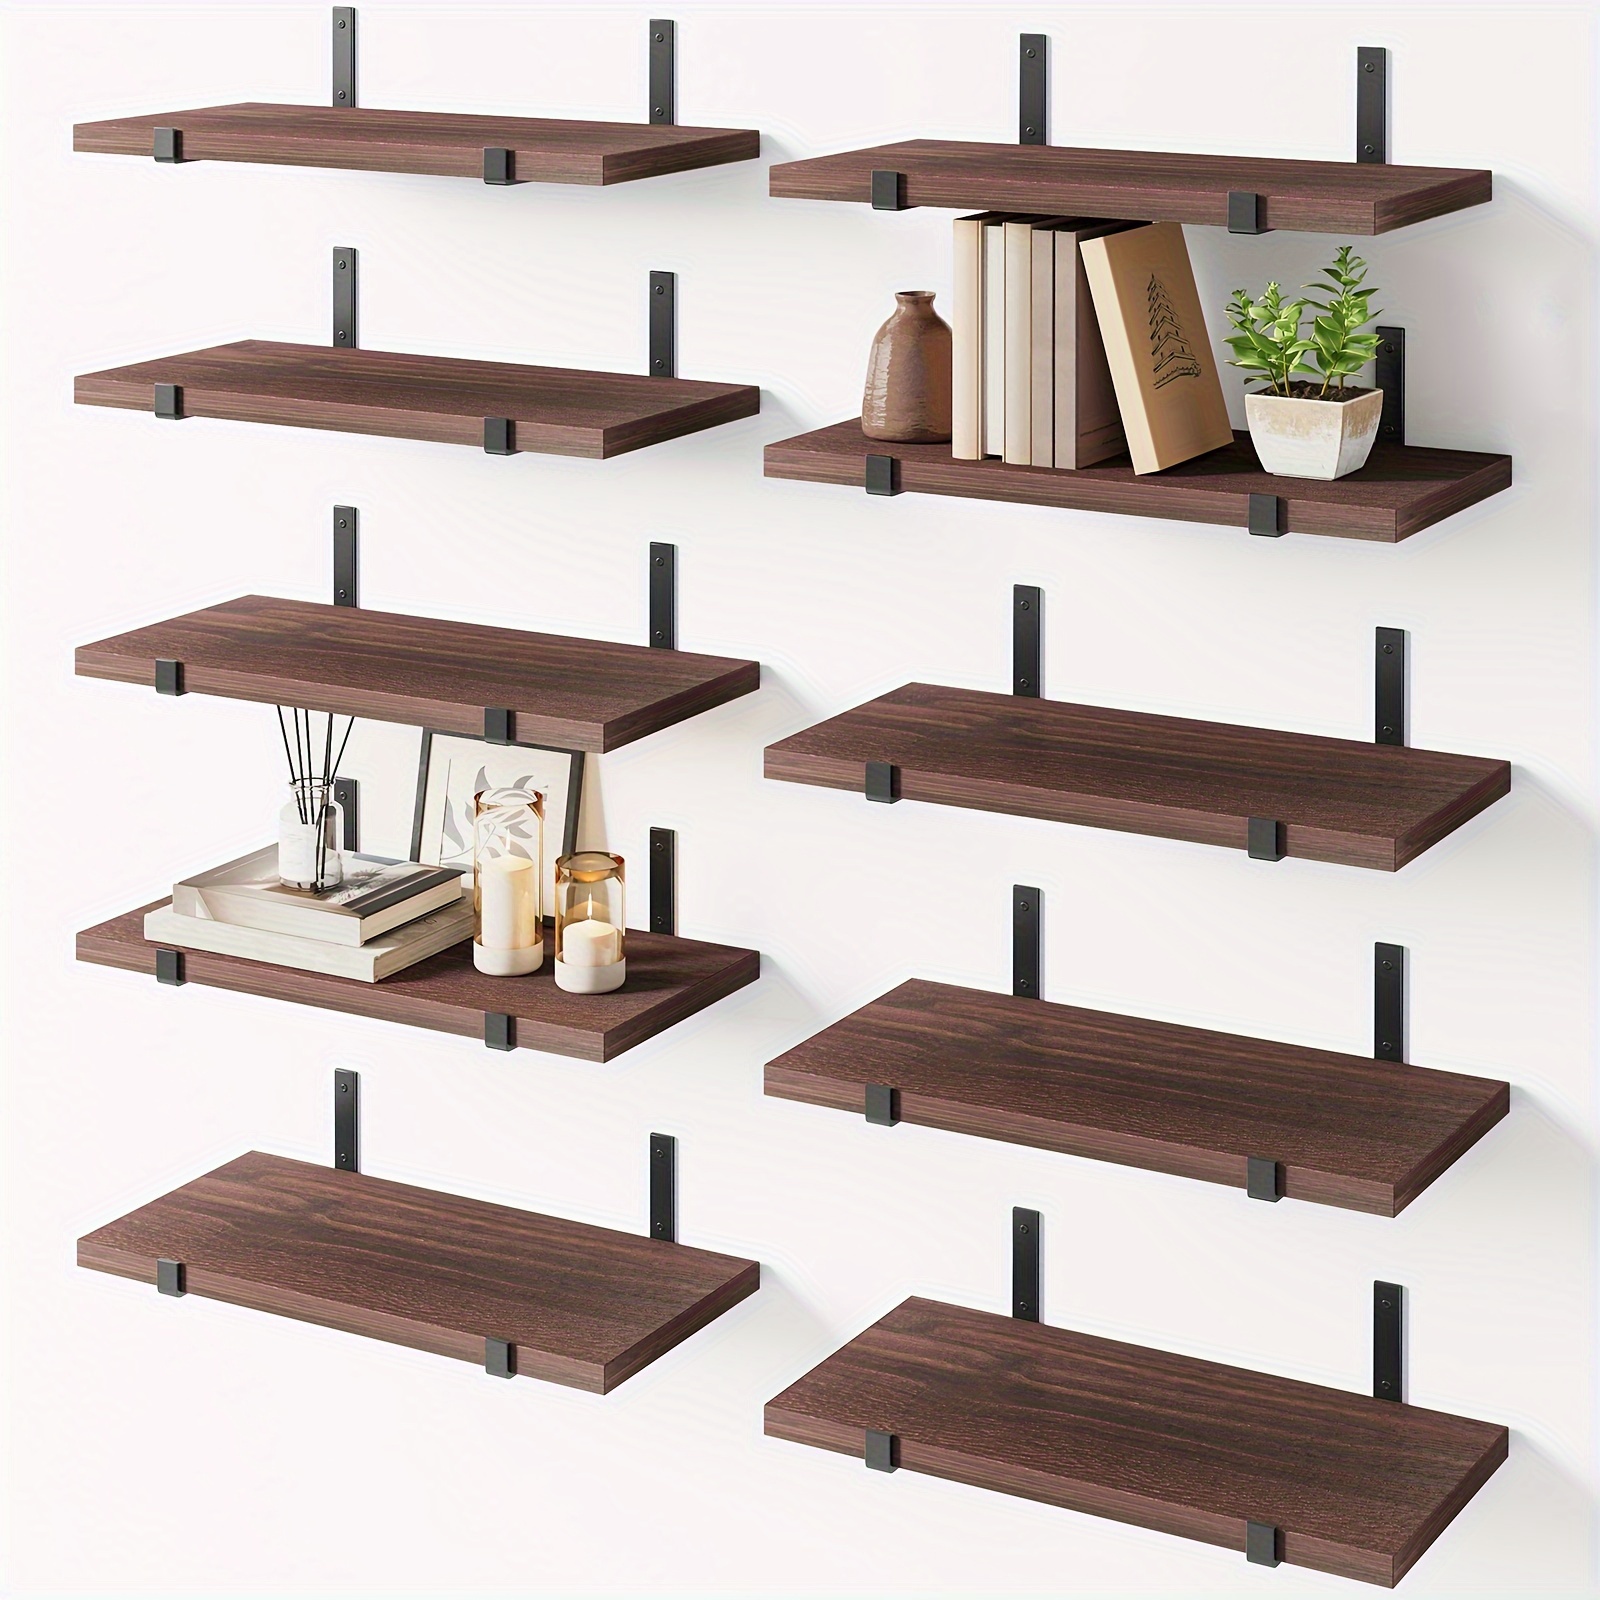 

10 Pcs Floating Shelves, Rustic Wood Wall Decor, Farmhouse Wall Mounted Shelves For Bedroom, Living Room, Kitchen And Bathroom, Place Small Plants, Trophies, Collectibles, Books, Photos, 15.7*5.9 In